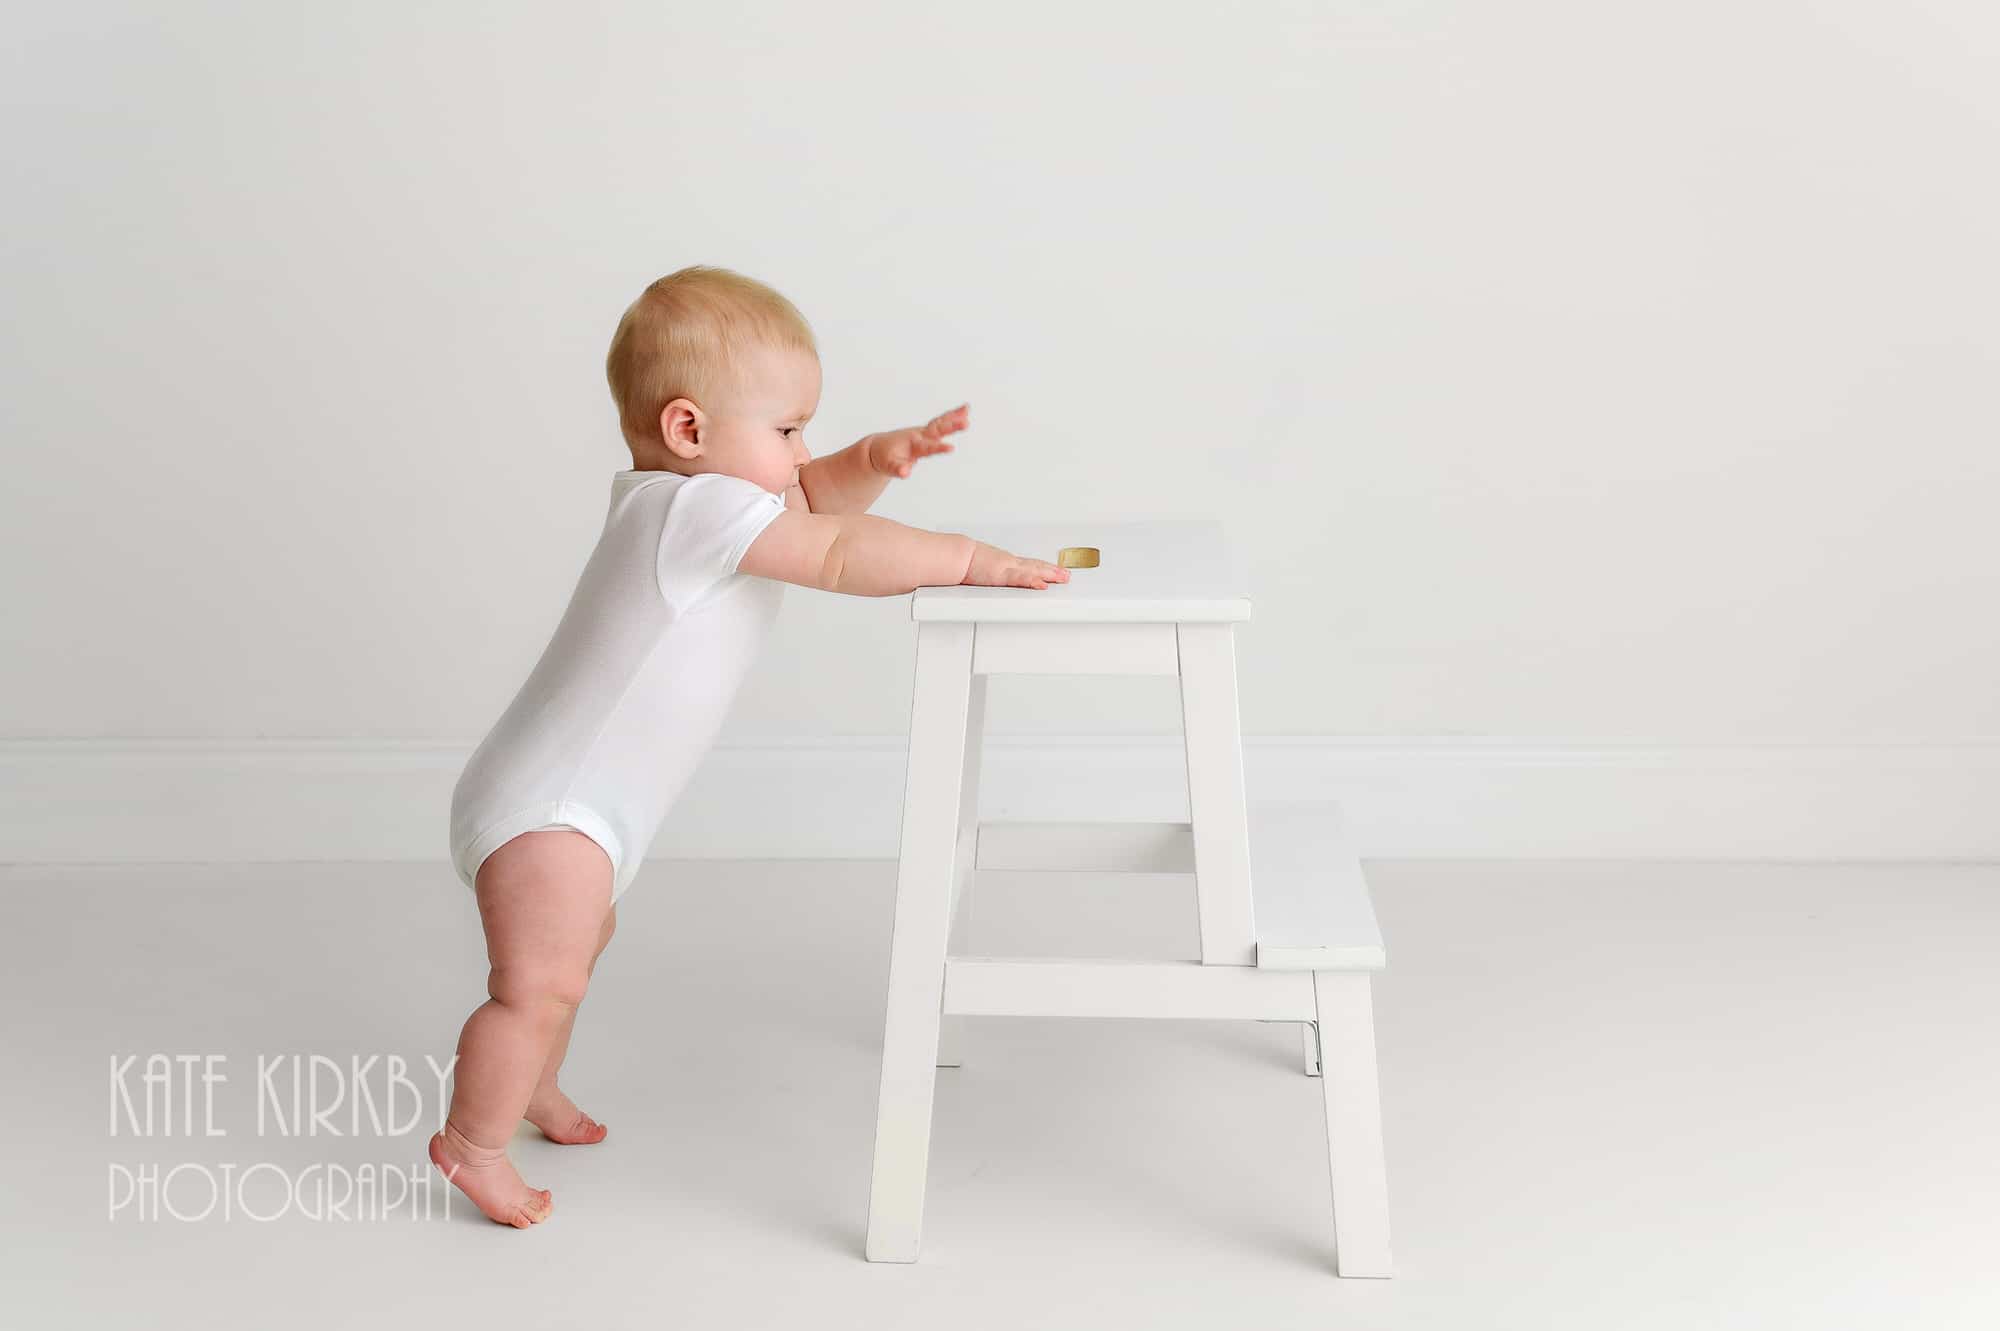 10 moth old baby in white vest holding himself up on white stool